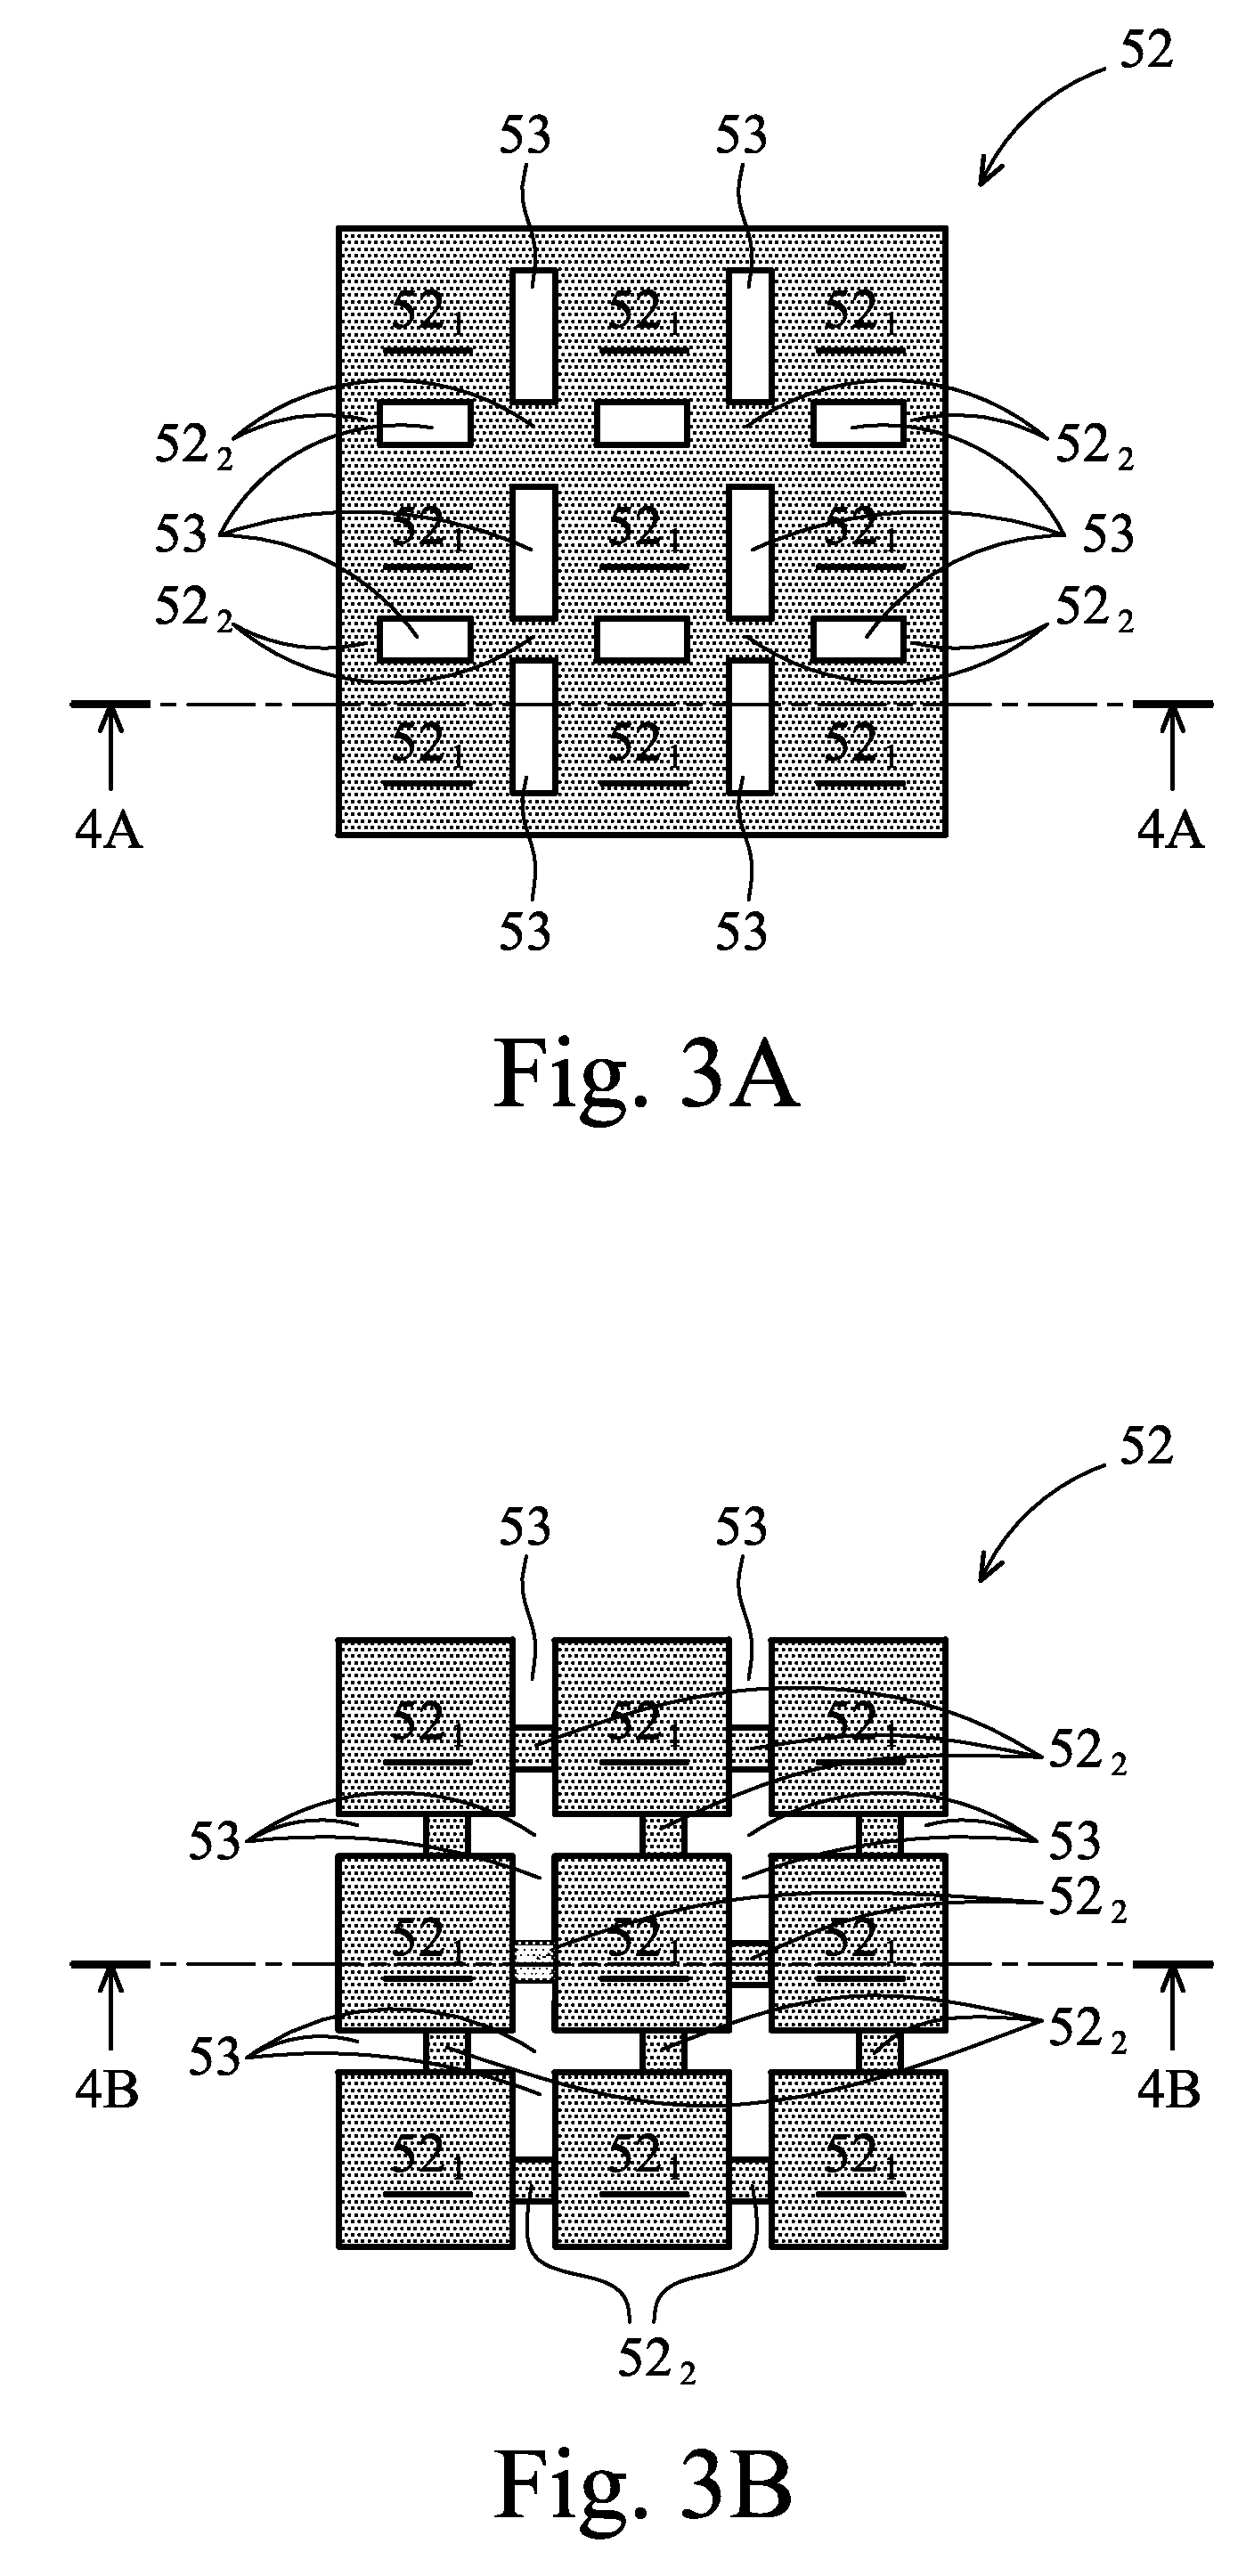 Through-substrate vias (TSVs) electrically connected to a bond pad design with reduced dishing effect